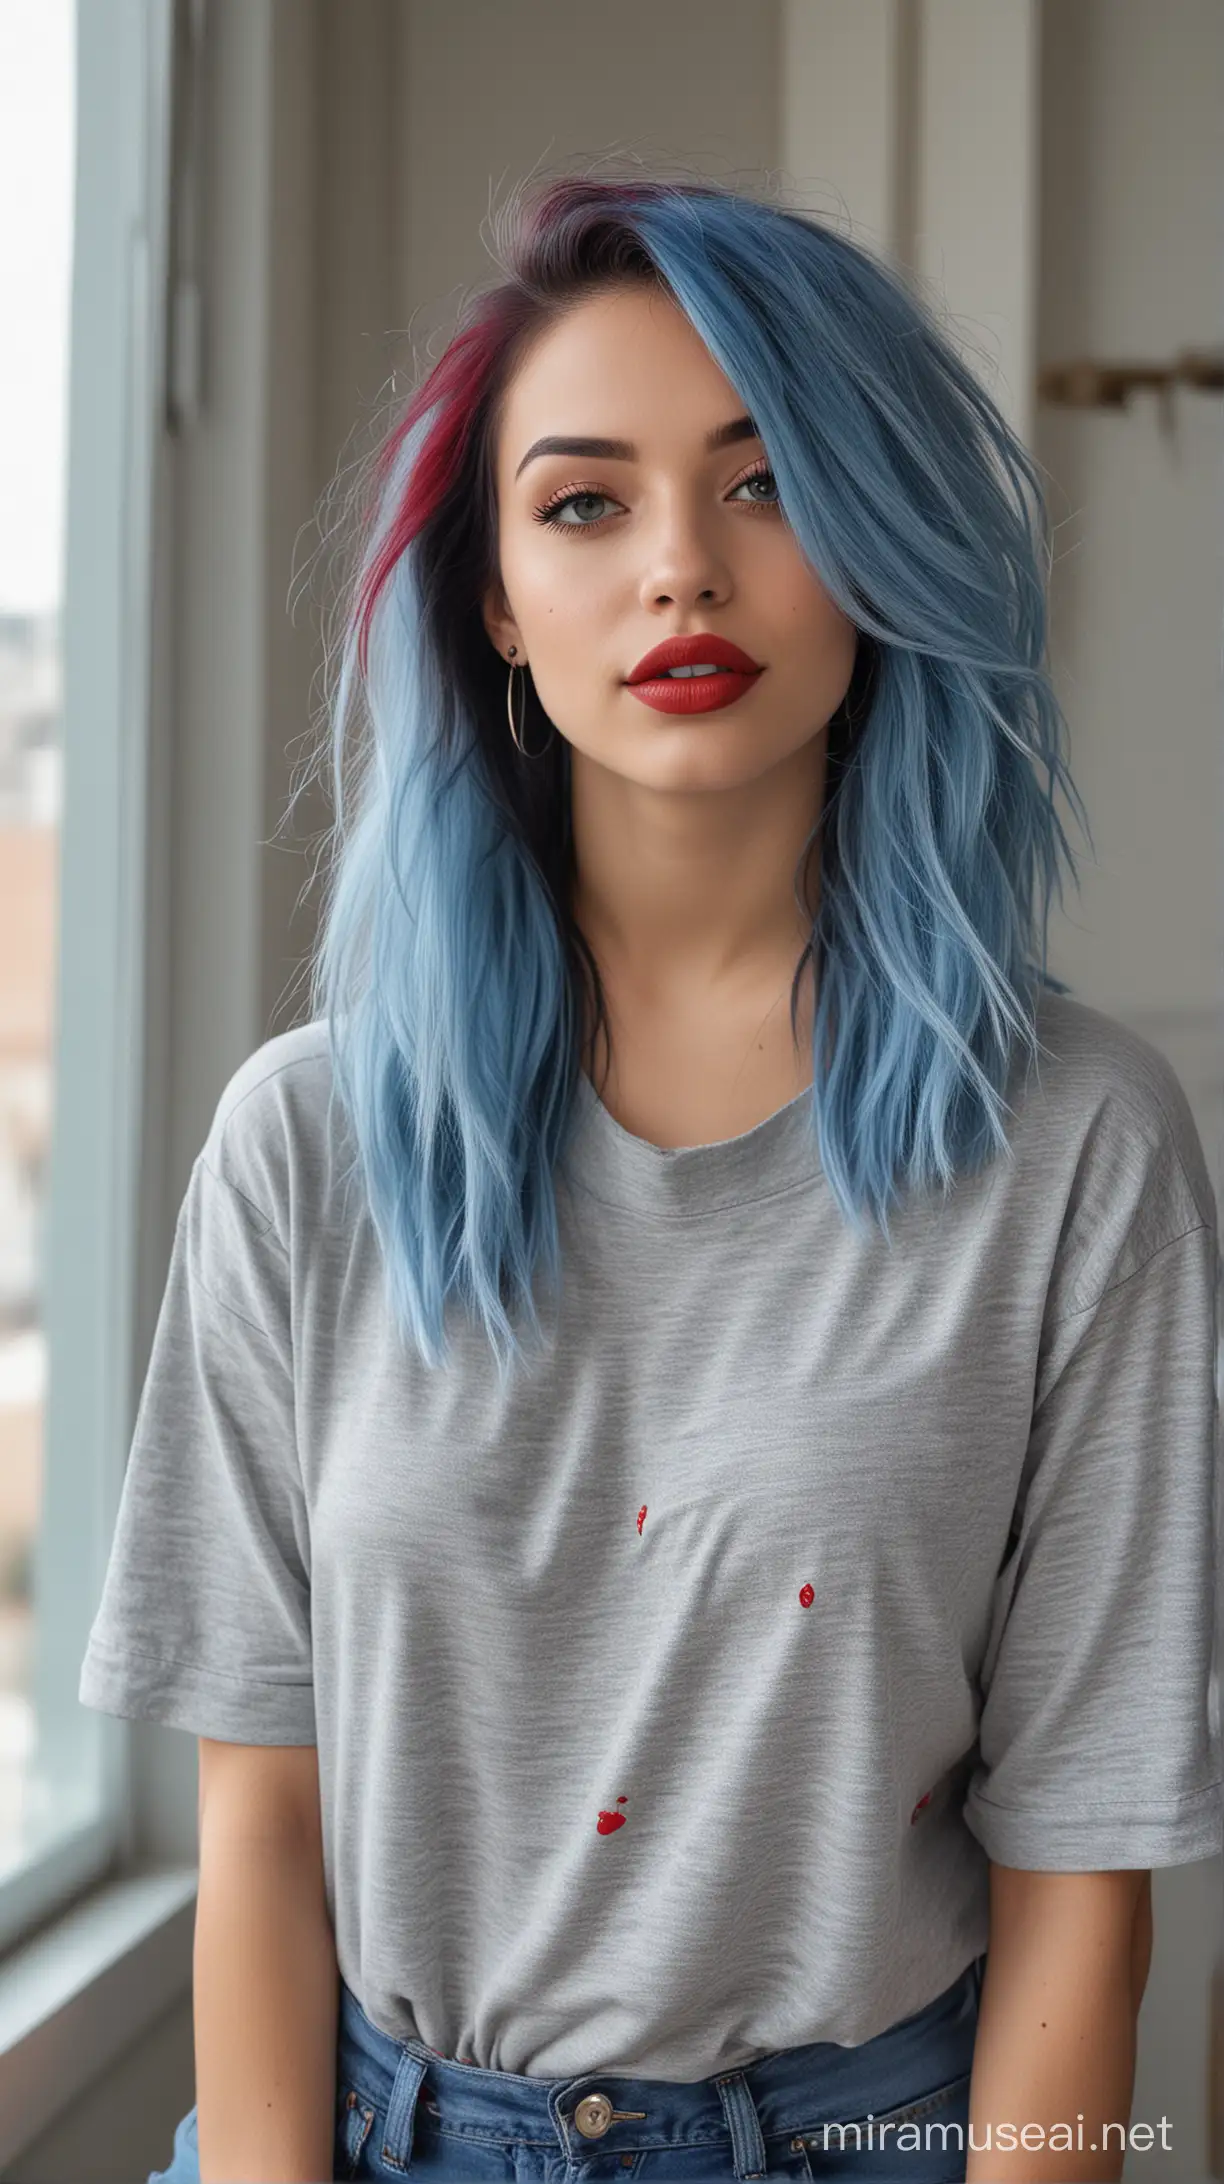 4k Ai art beautiful USA girl blue hair red lipstick nose ring ear tops fit jeans and gray colour shirt in usa home window